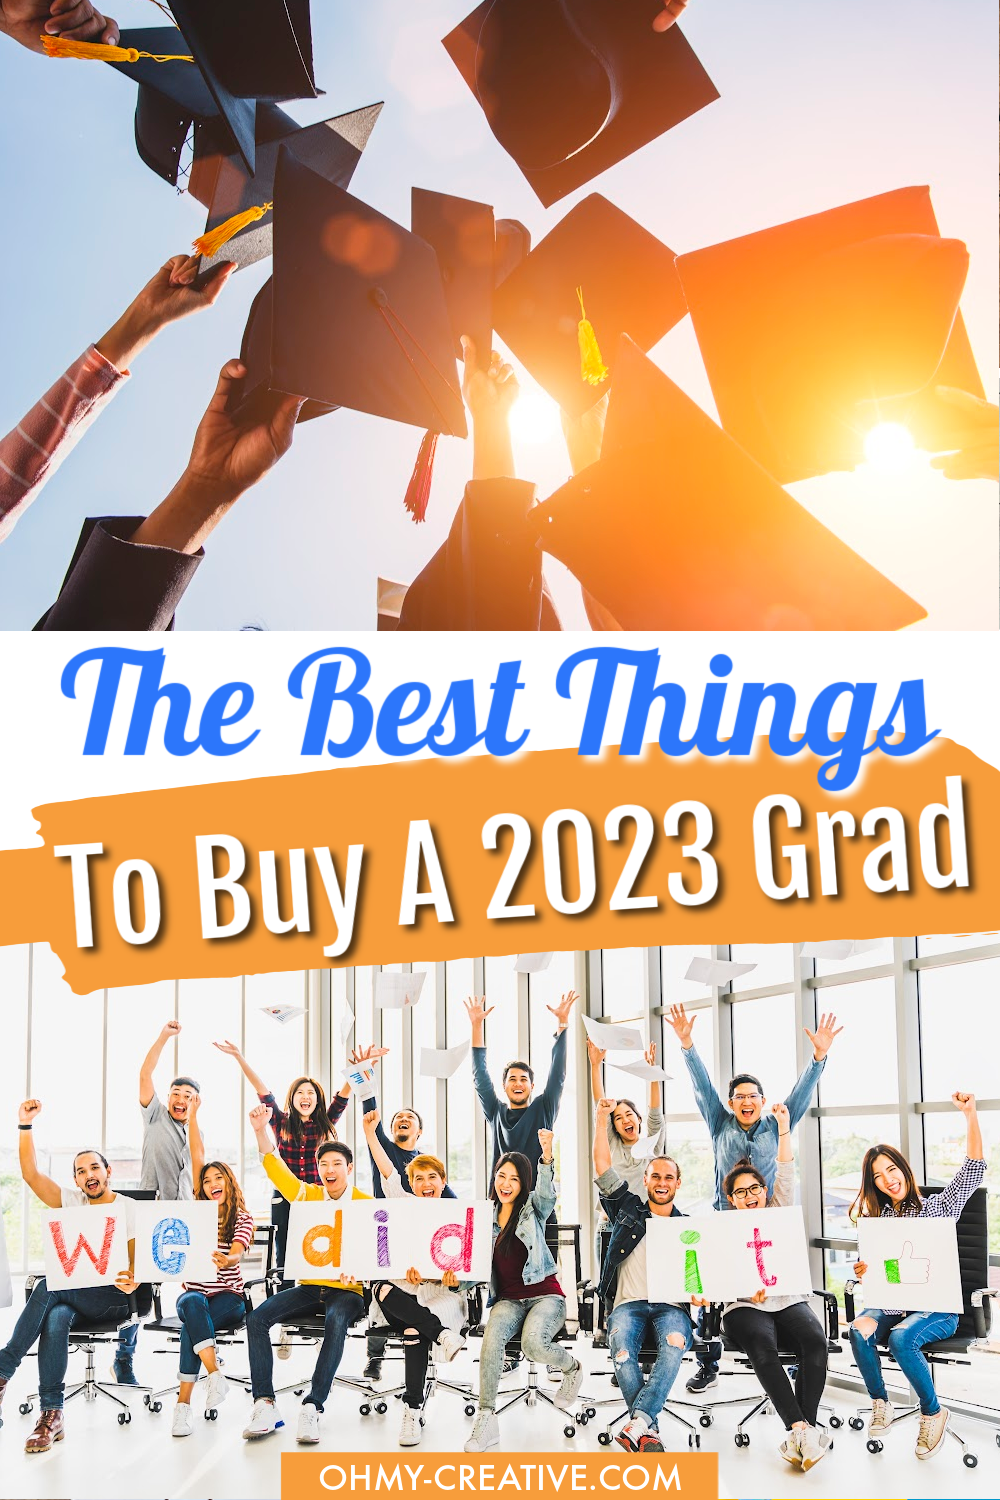 Graduation Gift Ideas: The Best Things To Buy A 2023 Graduate